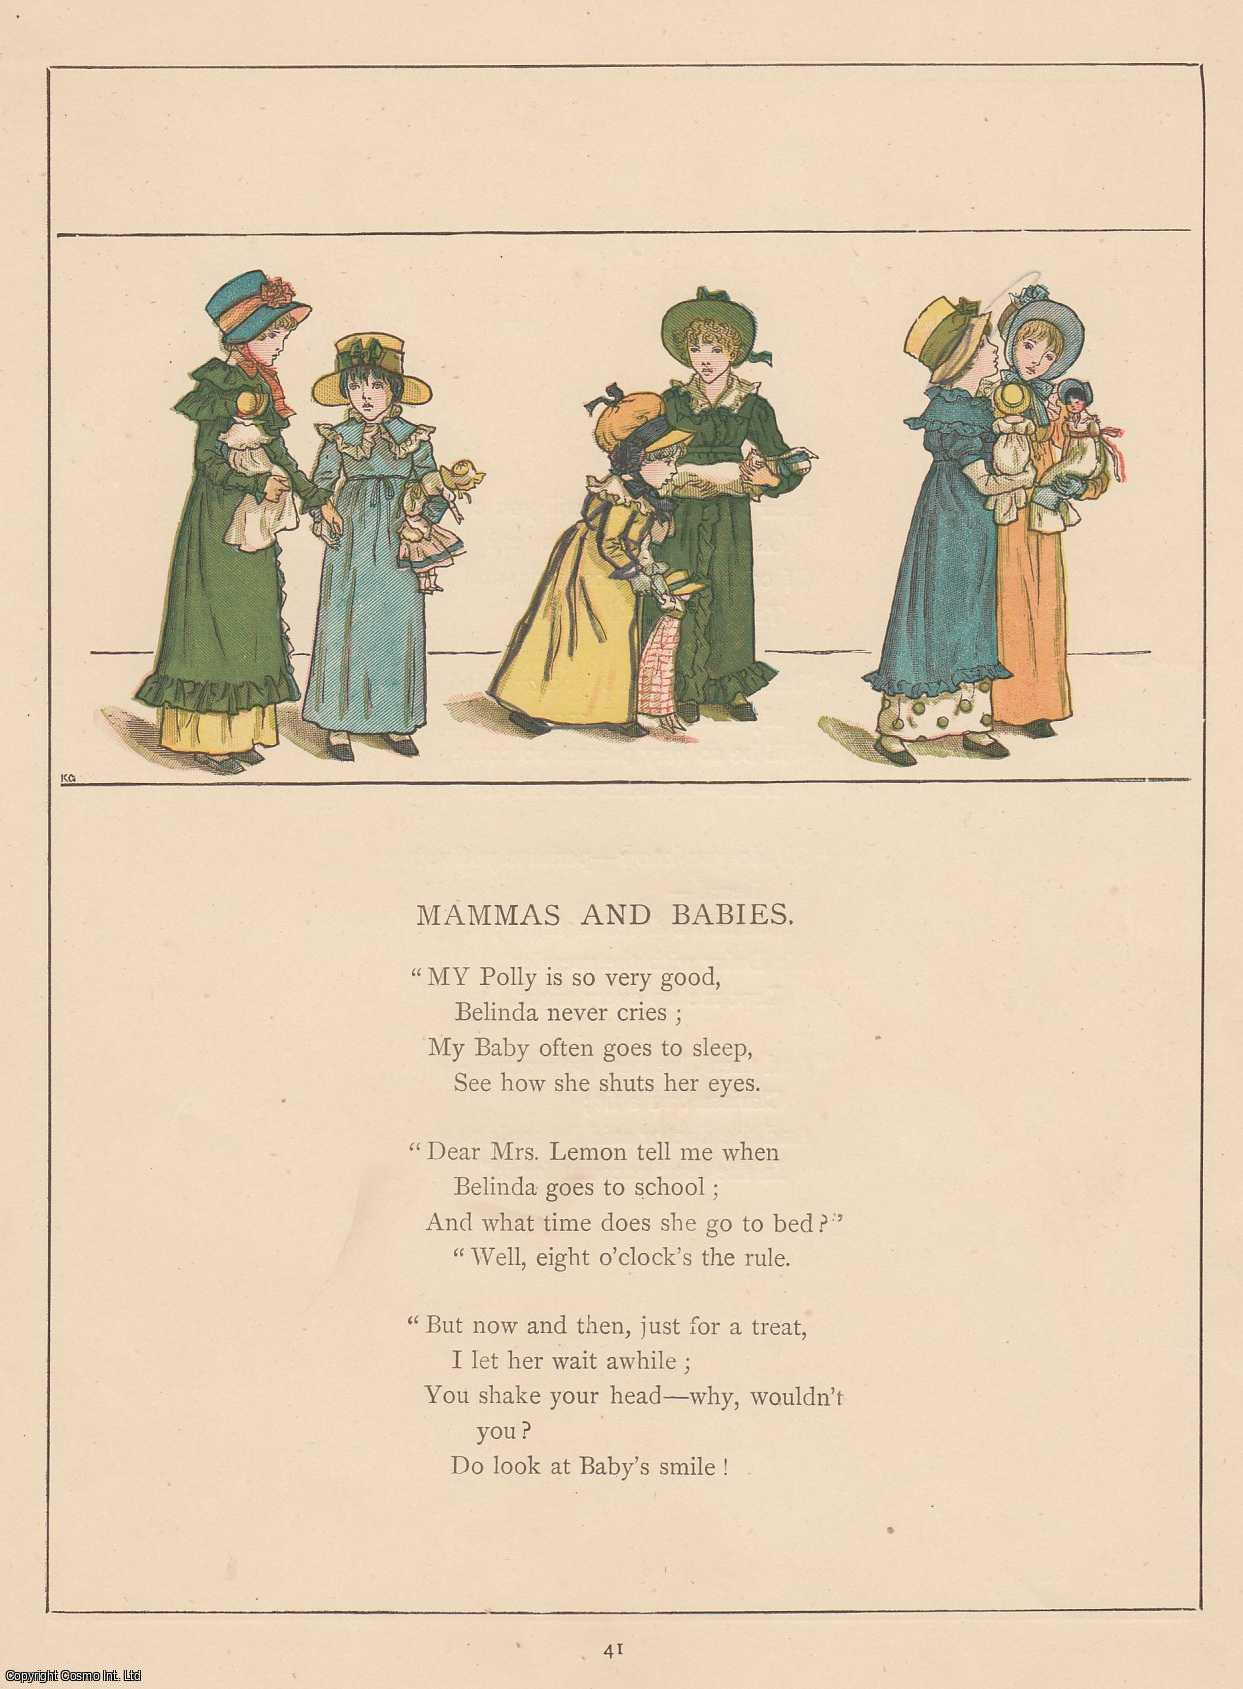 Kate Greenaway - Marigold Garden. Mammas and Babies, with rhyme. An original Kate Greenaway colour print, c.1885 from the work Marigold Garden, printed in colours by the expert printer Edmund Evans.